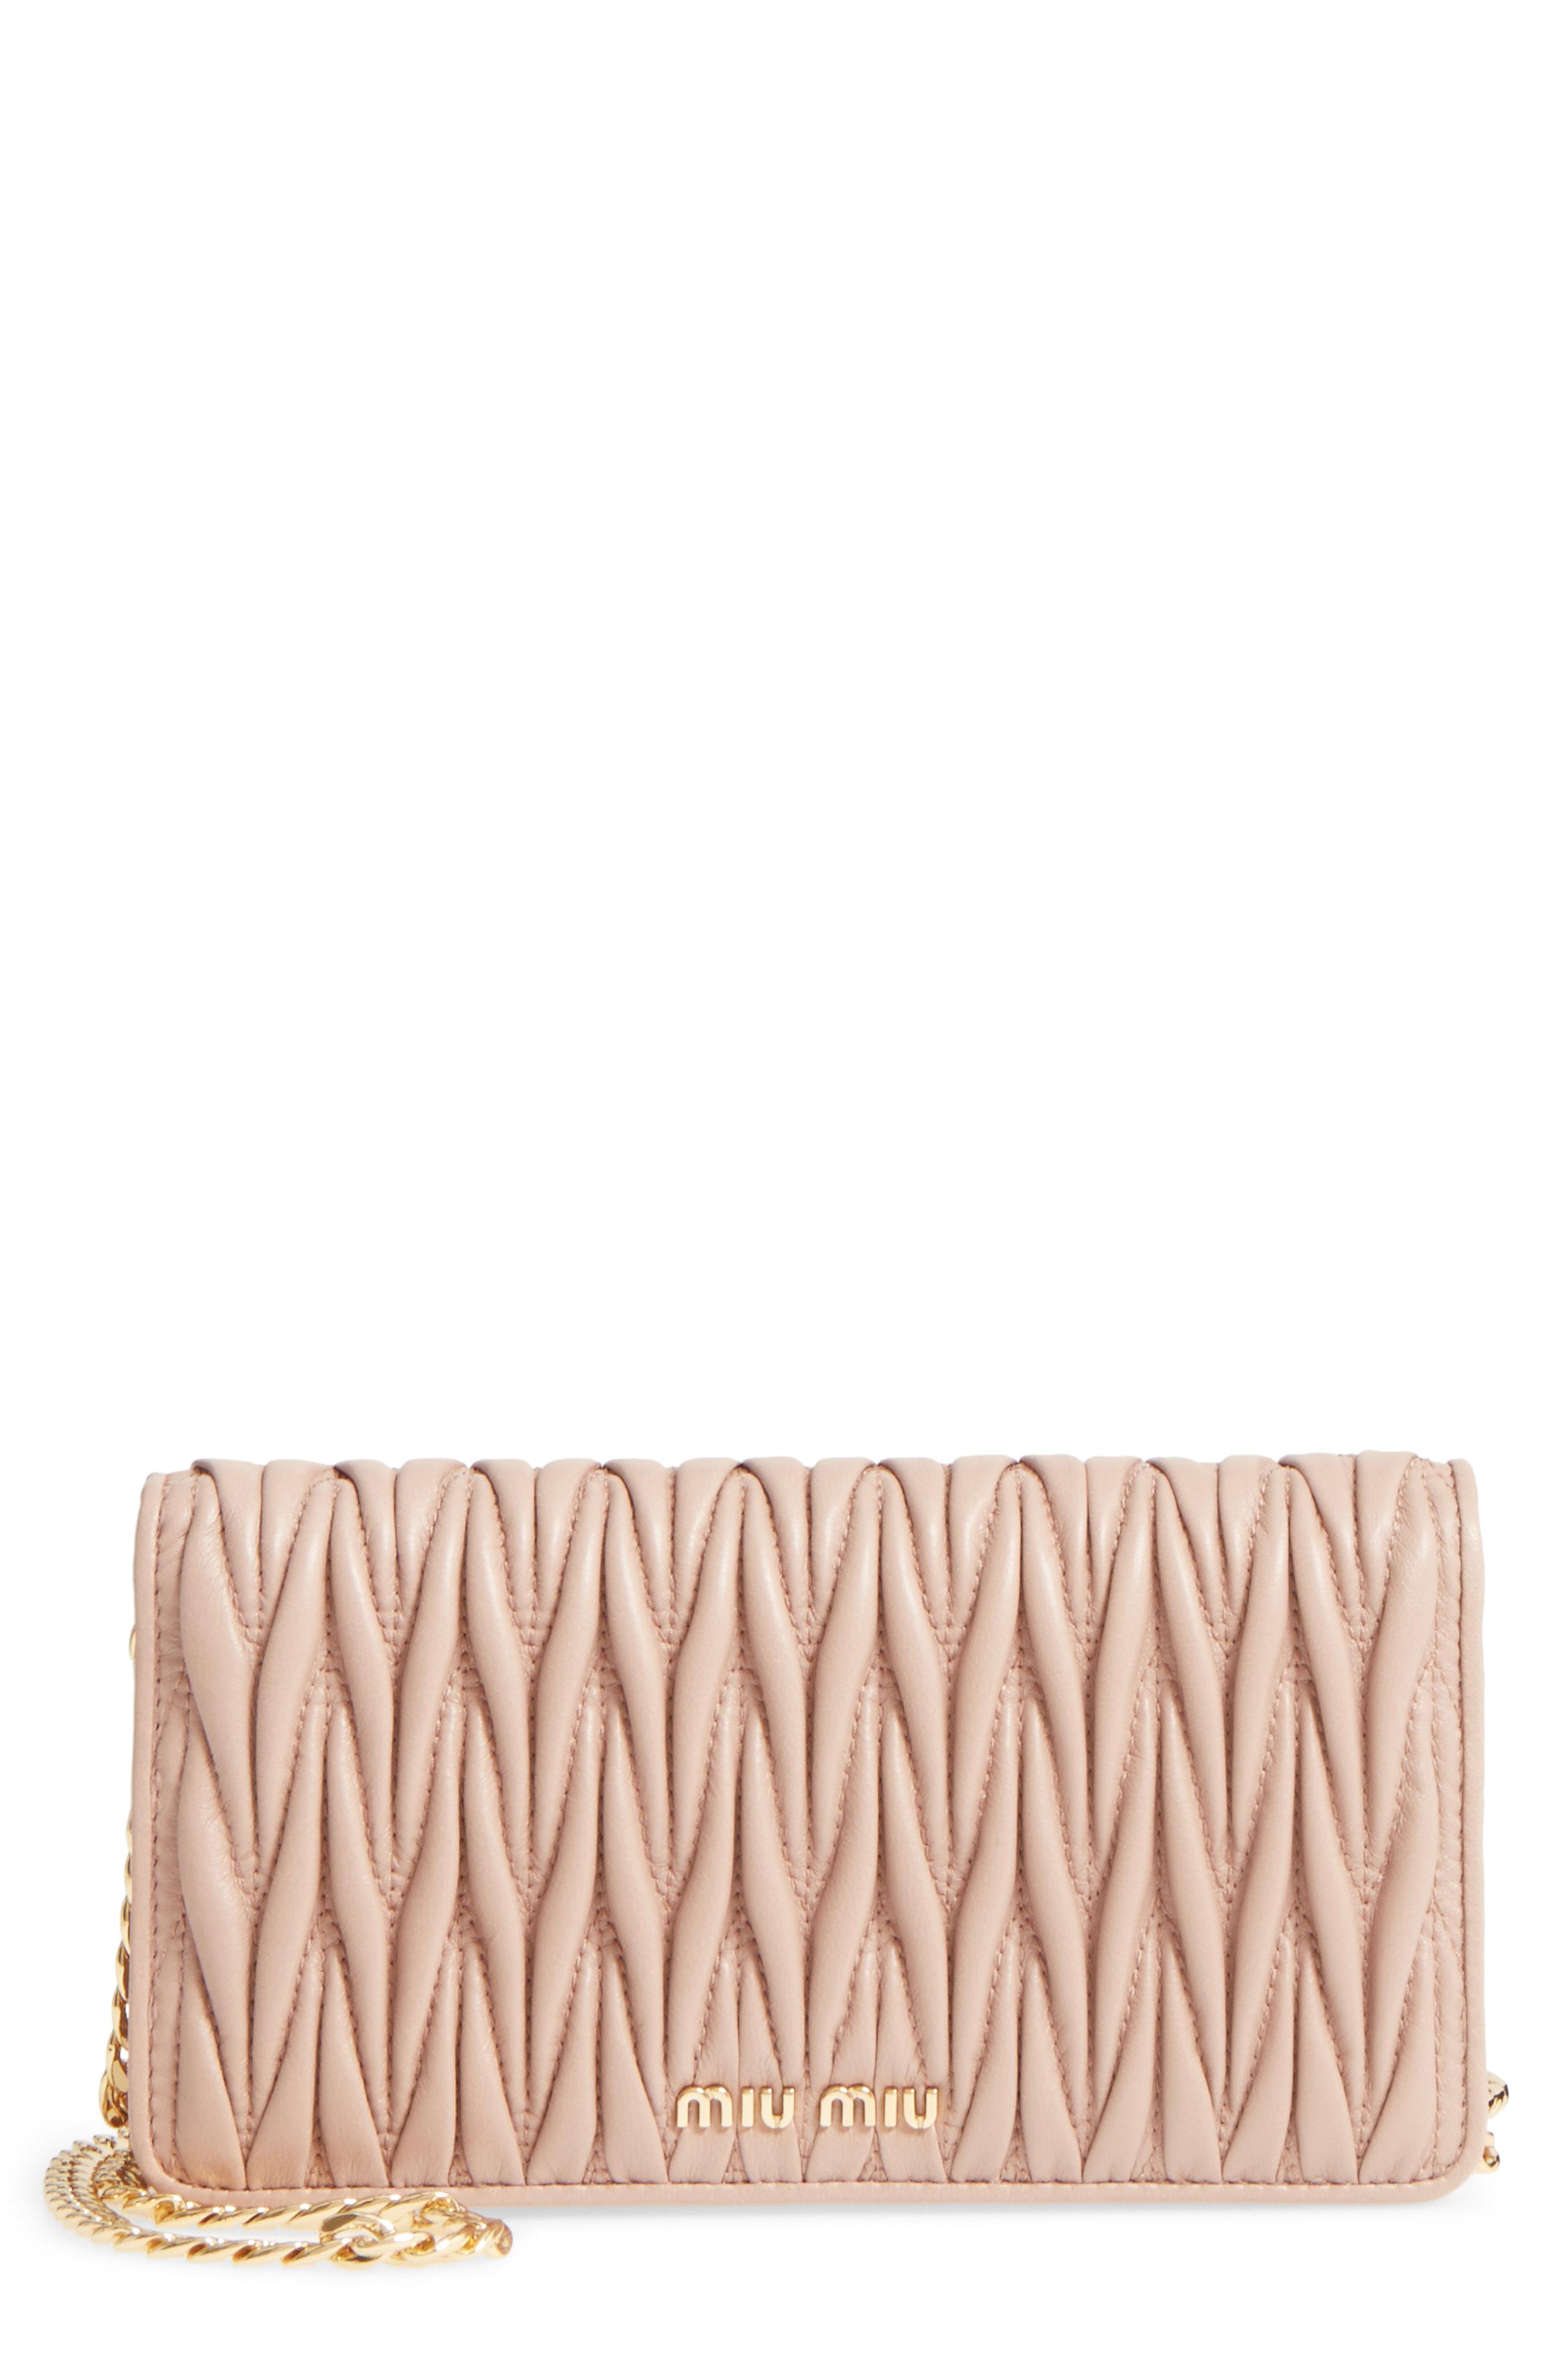 Lyst - Miu Miu Matelasse Leather Wallet On A Chain in Brown